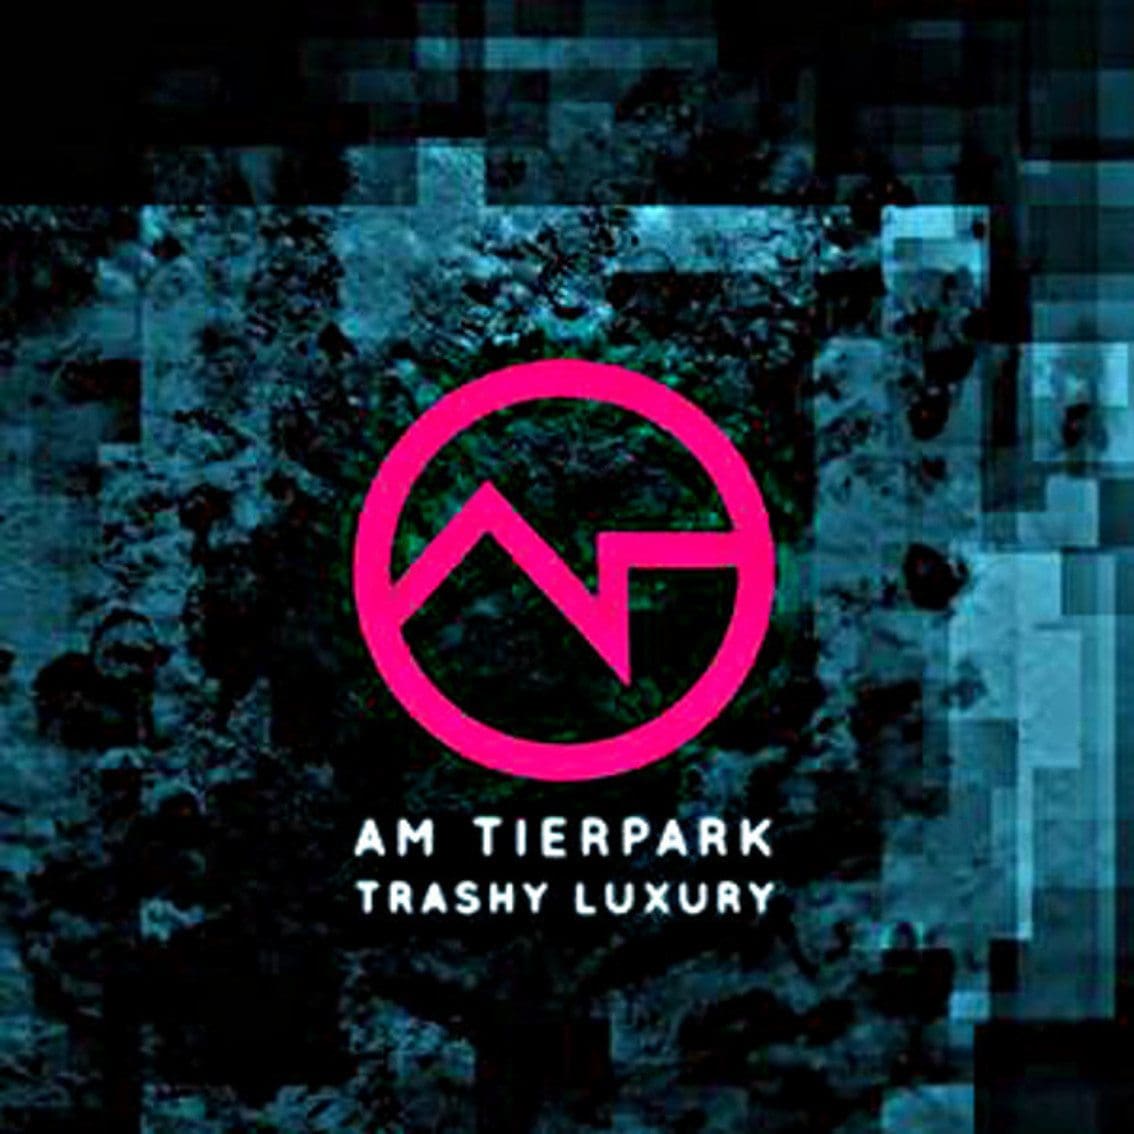 Danish Electro pop duo Am Tierpark issues 2CD limited edtion of new album 'Trashy Luxury' in November - pre-orders accepted now